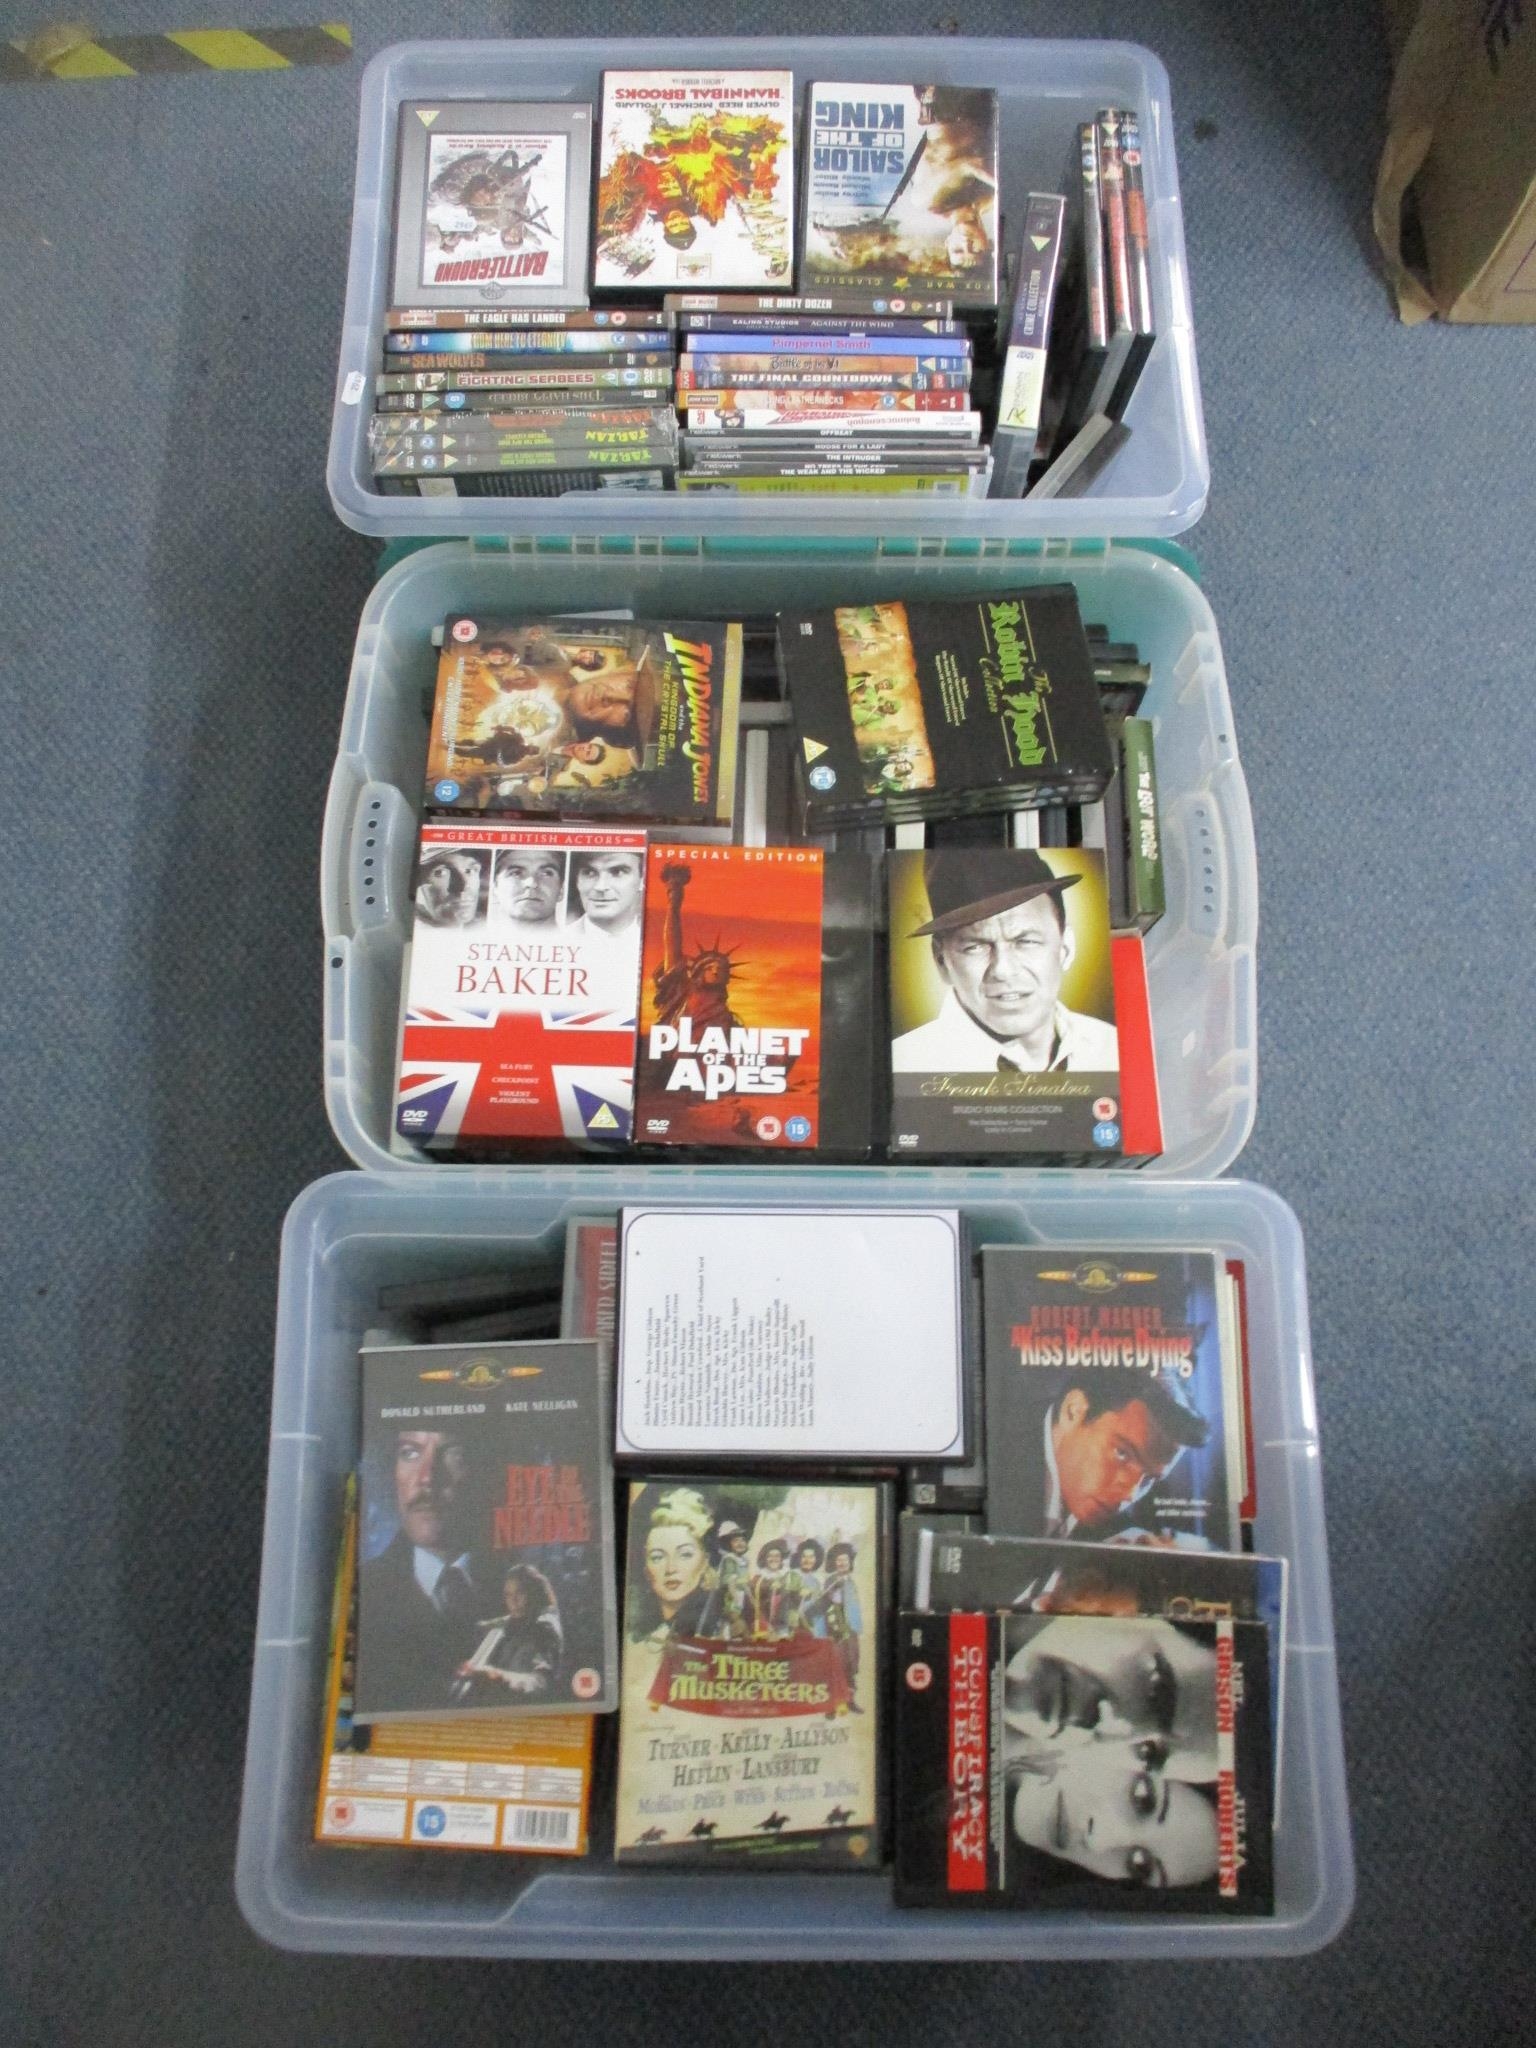 Three boxes of DVDs to include The Three Musketeers, Planet of the Apes, and Sailor of the King